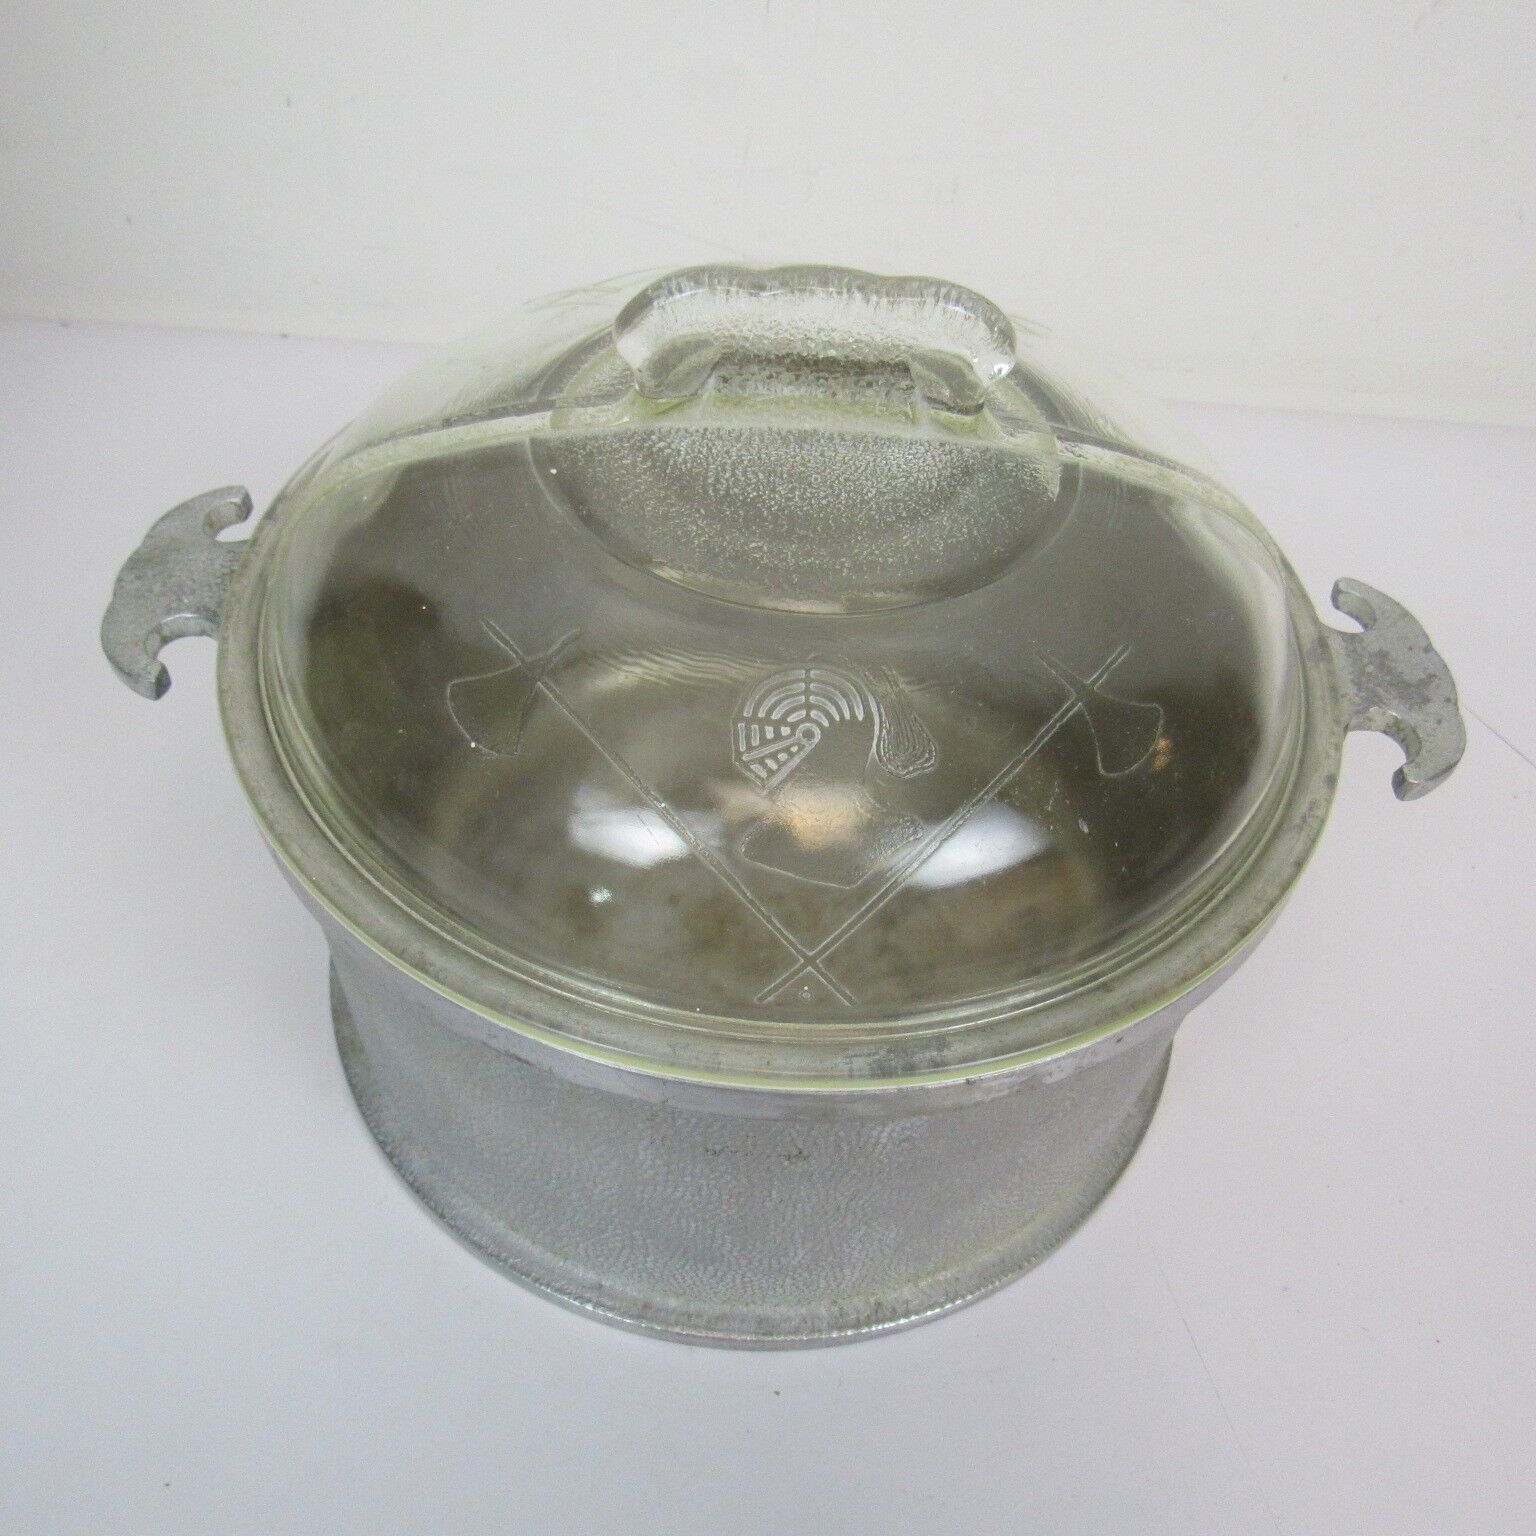 Vintage guardian service aluminum cookware 2 quart with glass lid Collectible